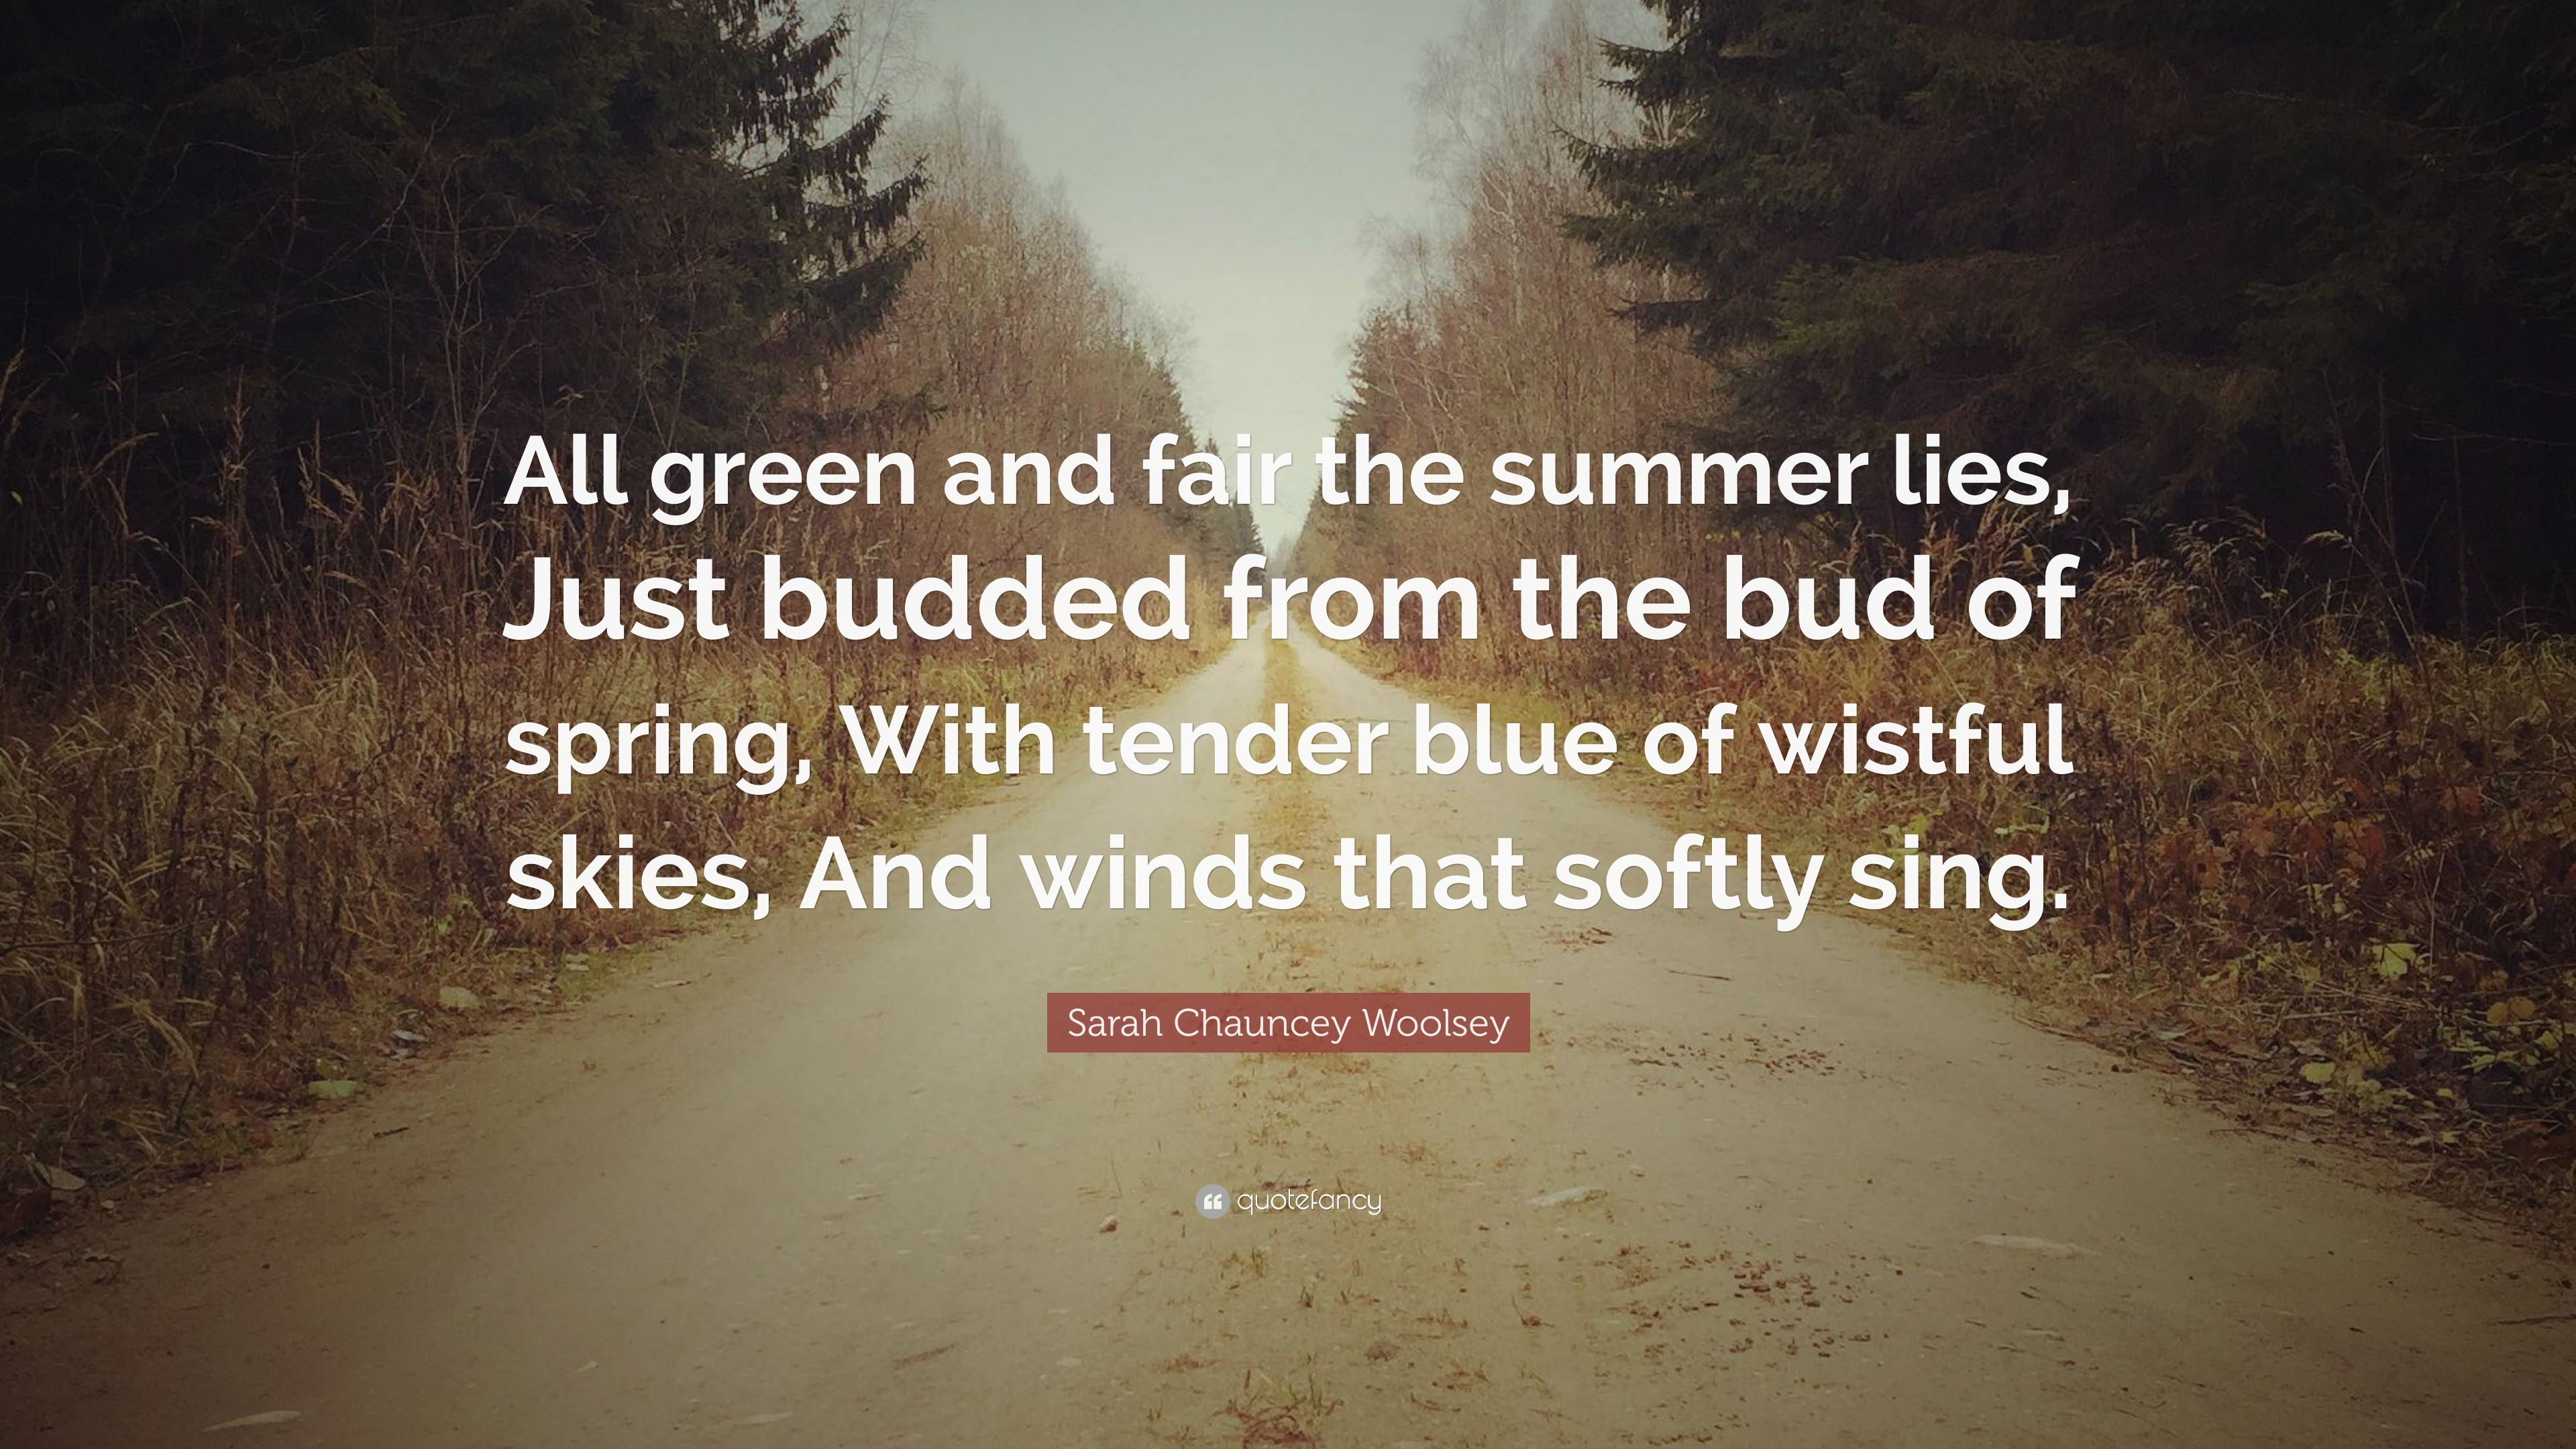 Sarah Chauncey Woolsey Quote: “All green and fair the summer lies